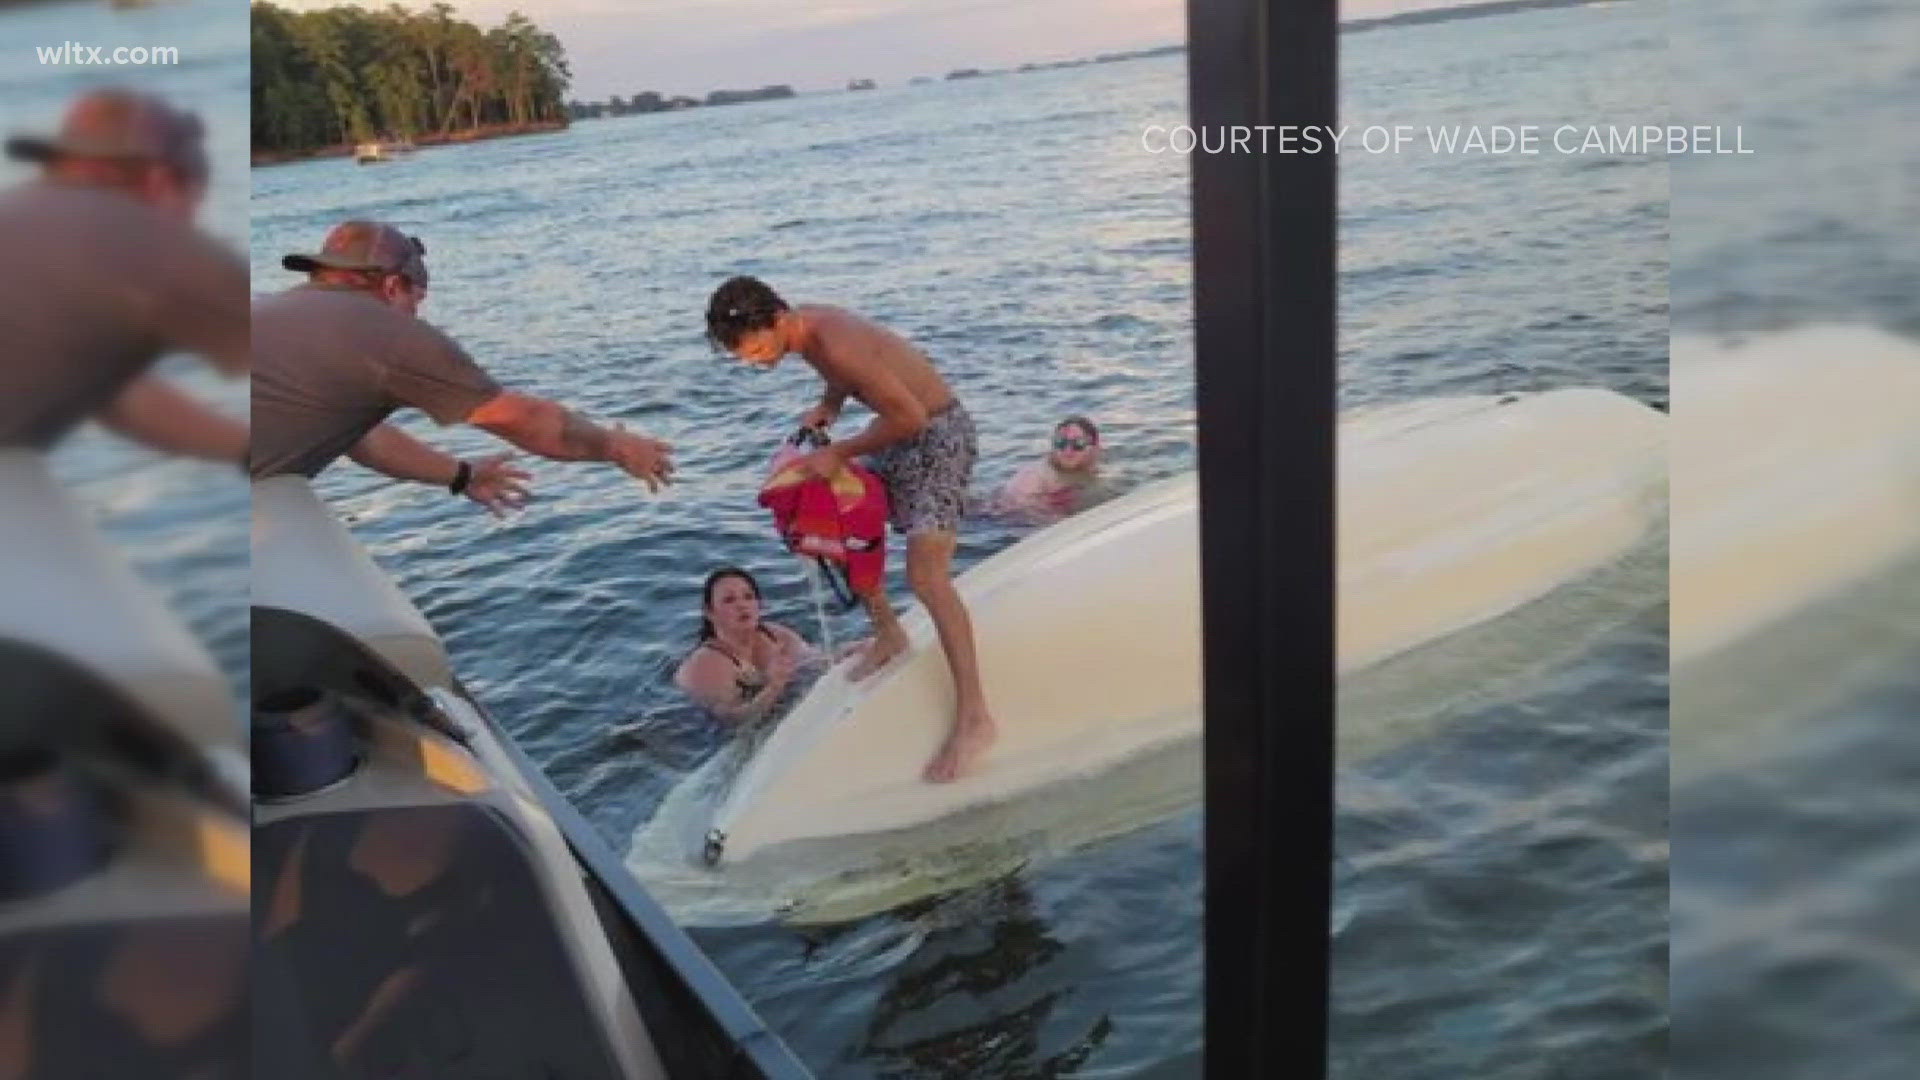 Wade Campbell helped get some kids out of the water after their boat capsized.